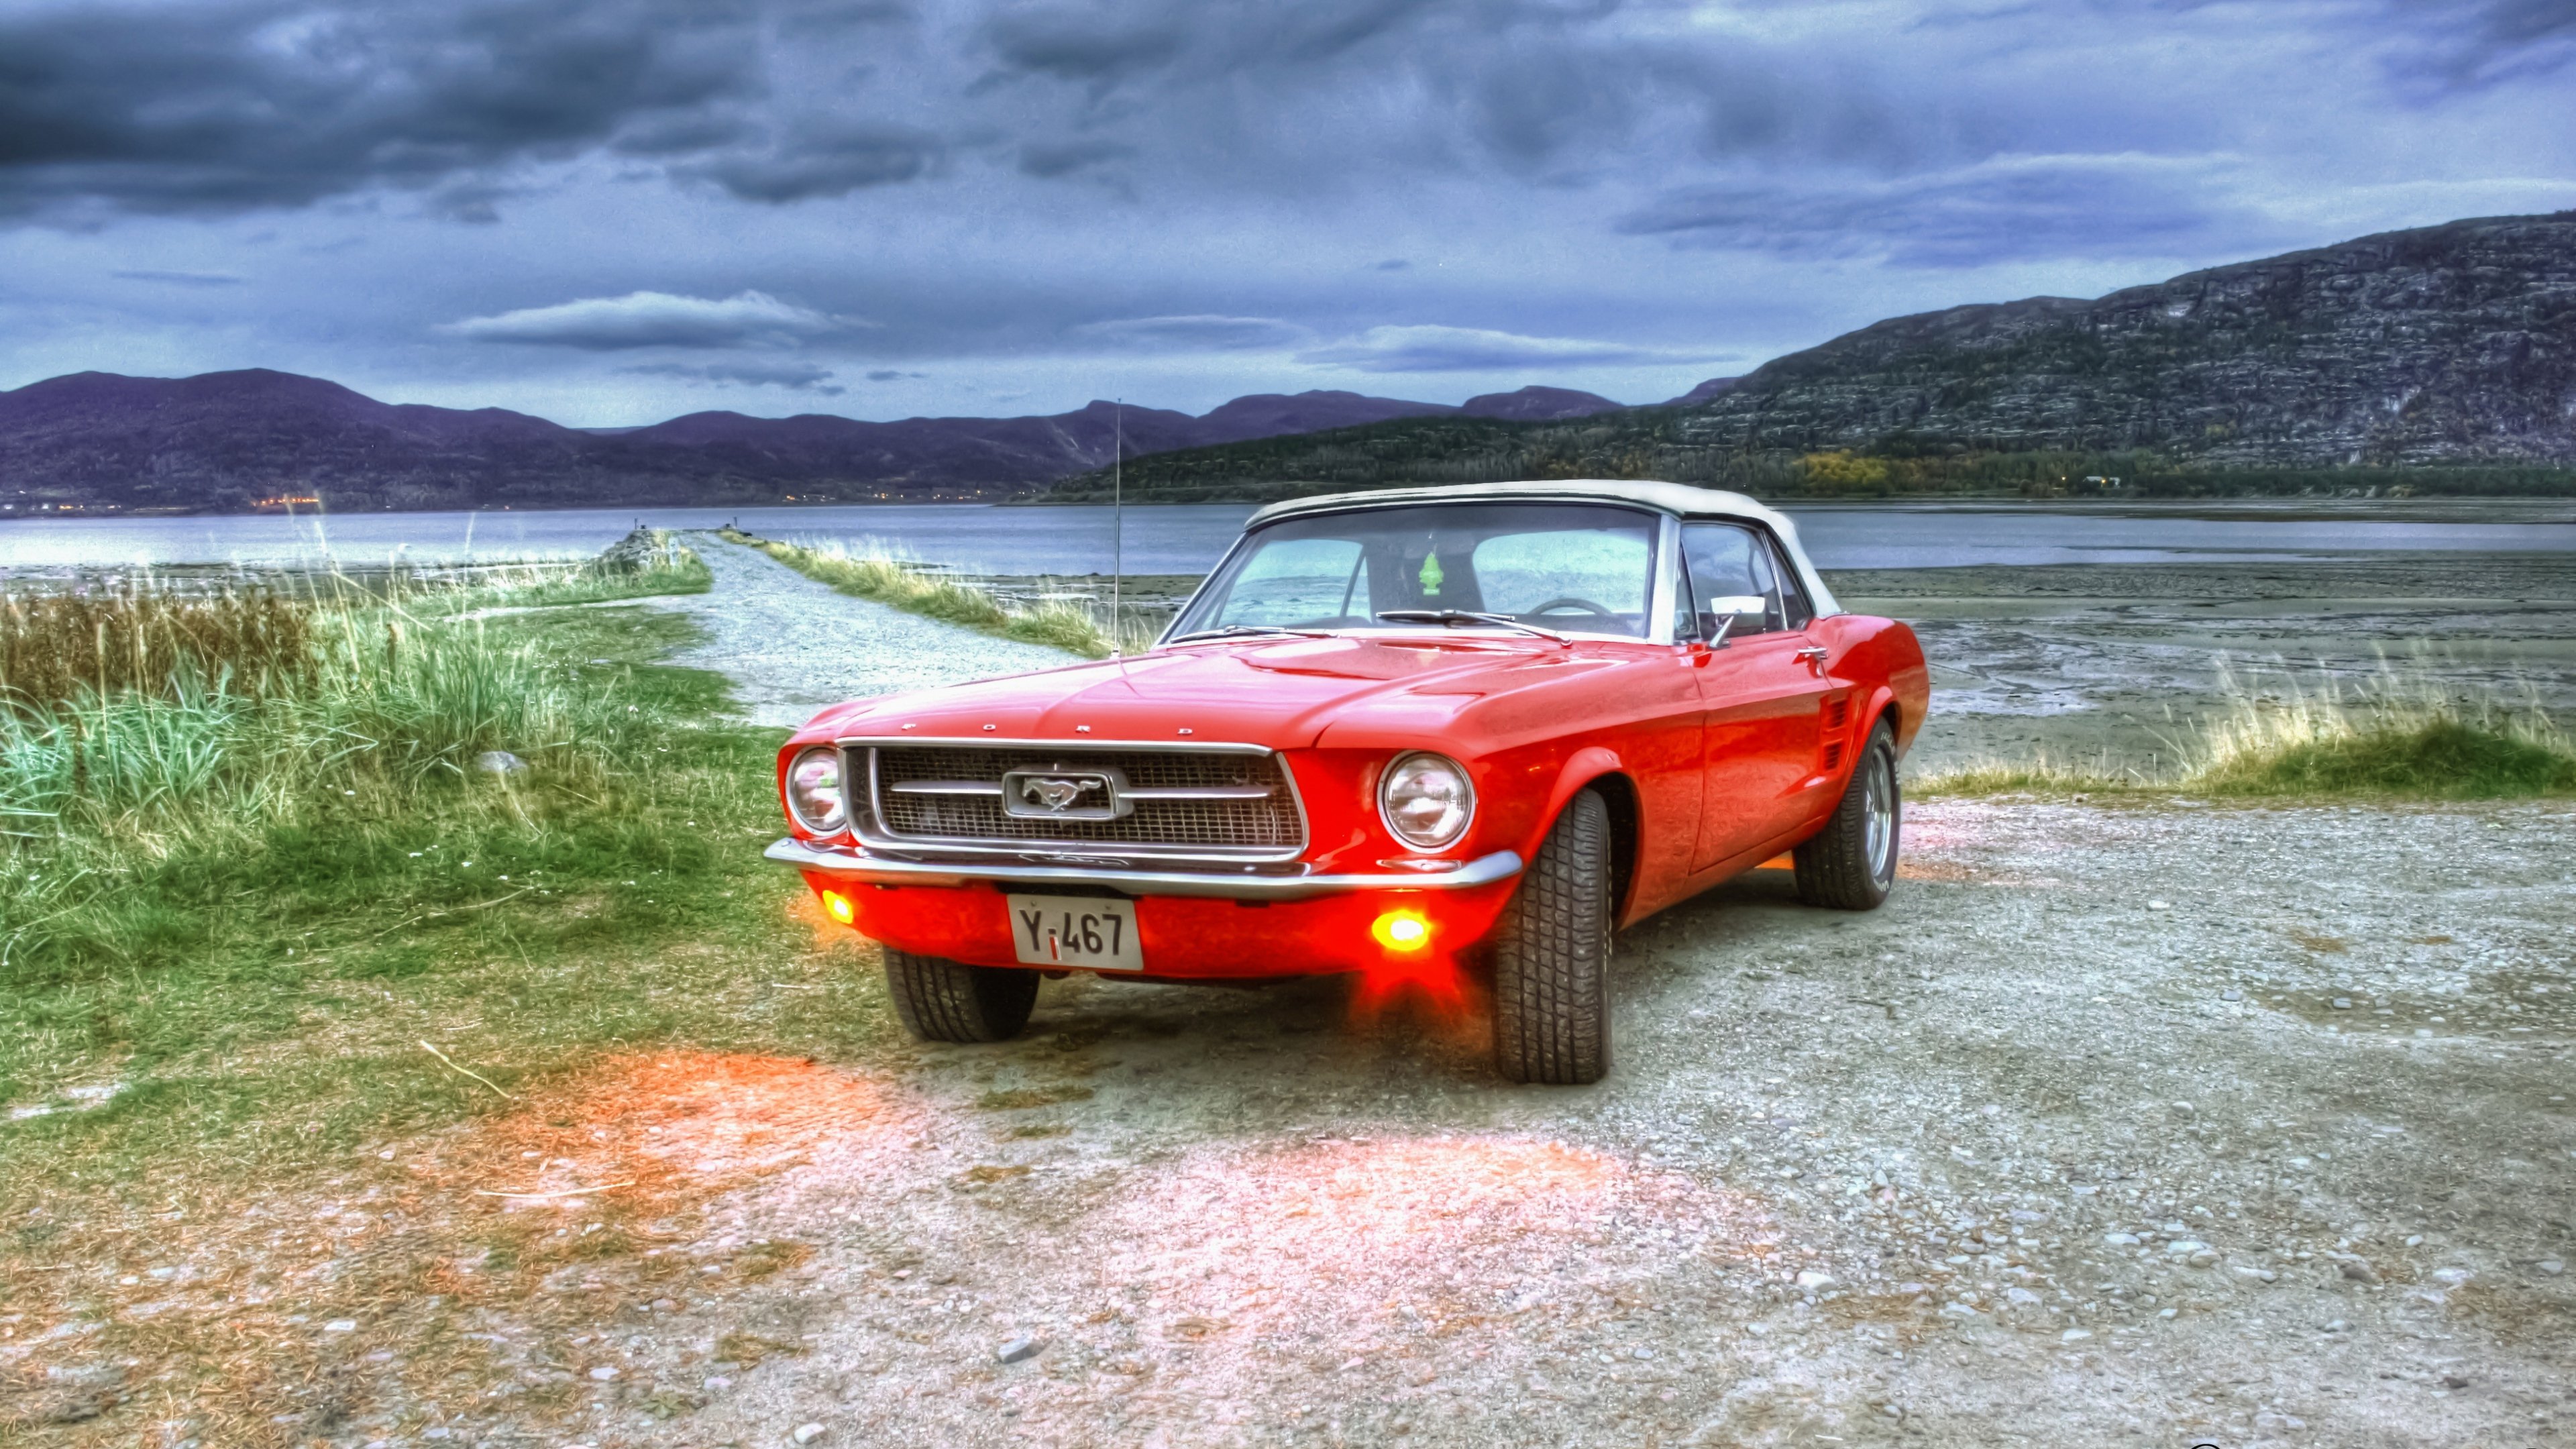  3840x2160 Ford Mustang Hdr Wallpaper Background 4K Ultra HD